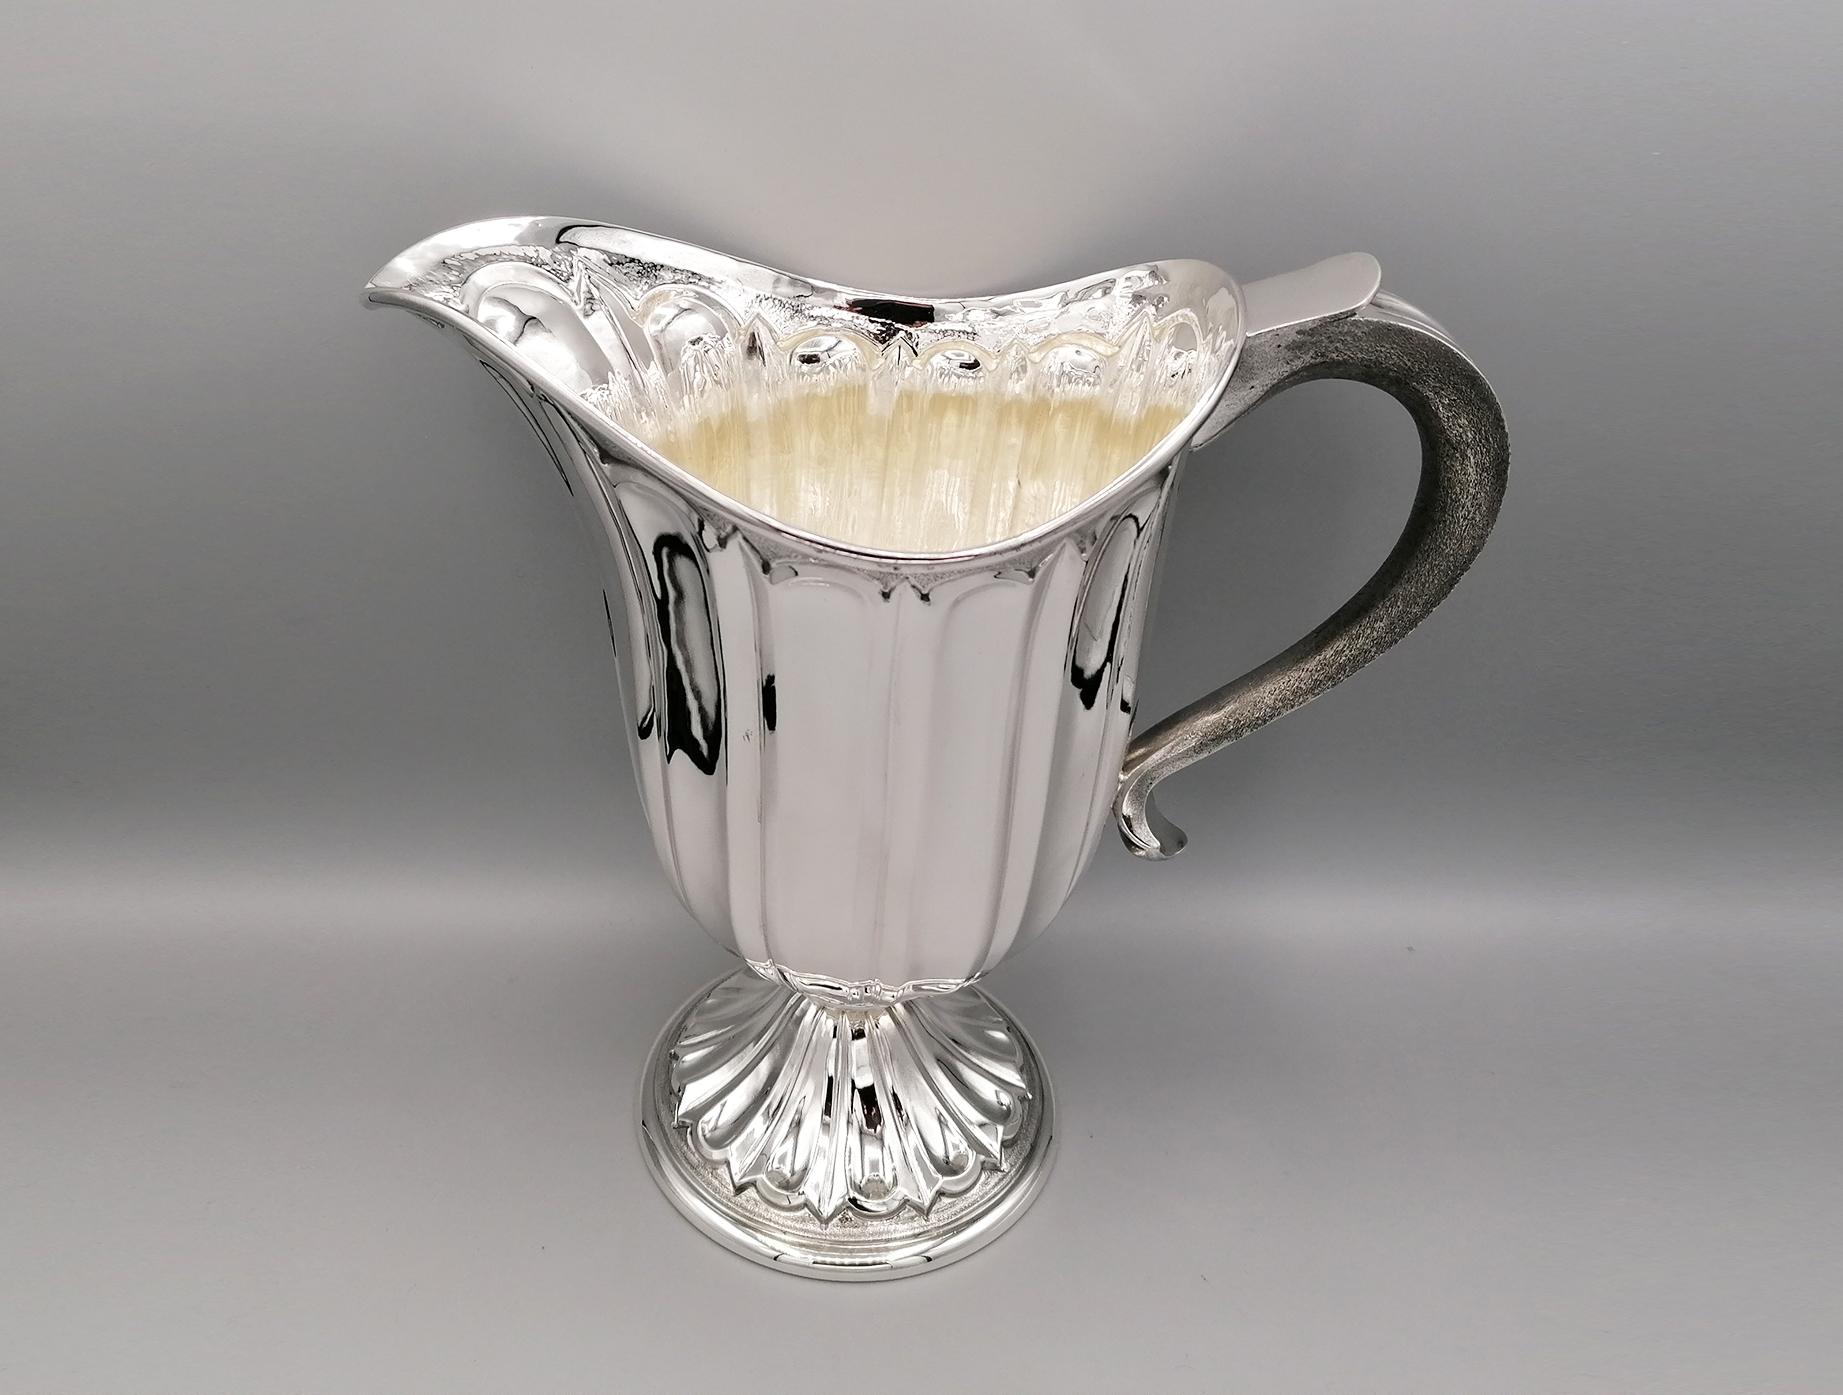 Fully handmade medieval style solid sterling silver jug. The body is oval and shaped embossed grooves. The base, separated from the rest of the body by a bushing, is round with the same design.
The handle has been worked in checkering on the inside